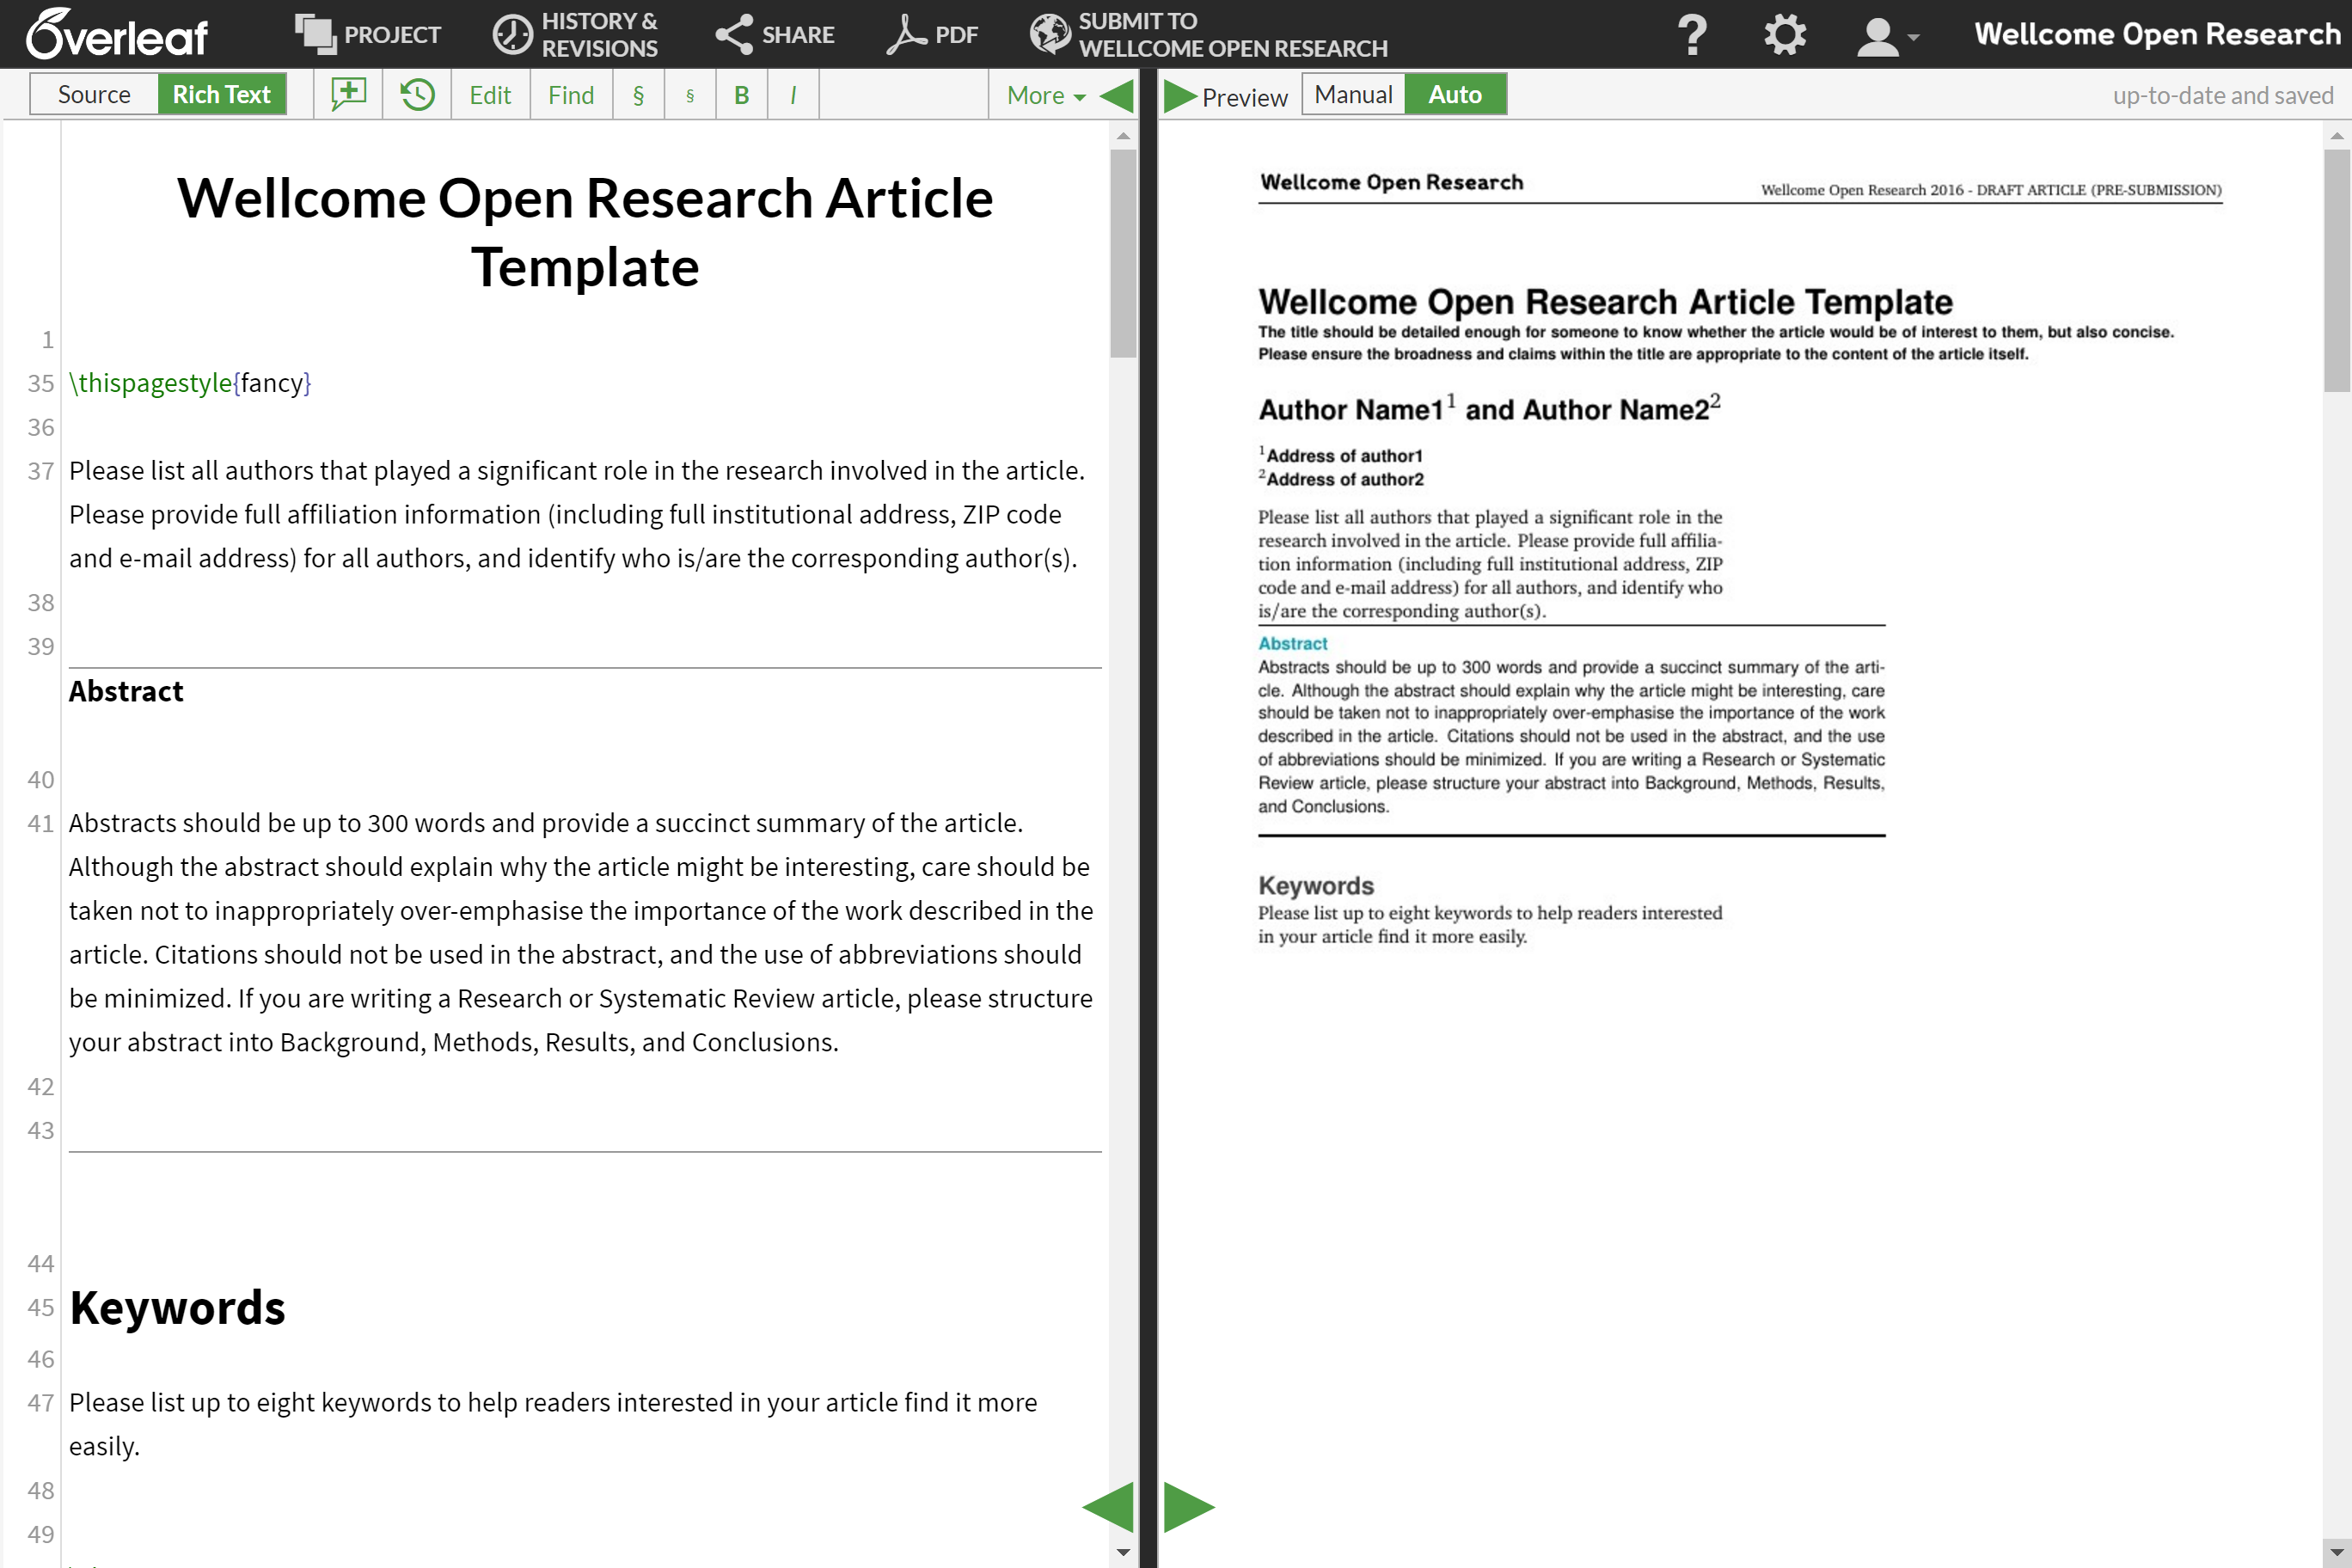 The new Wellcome Open Research article template on Overleaf